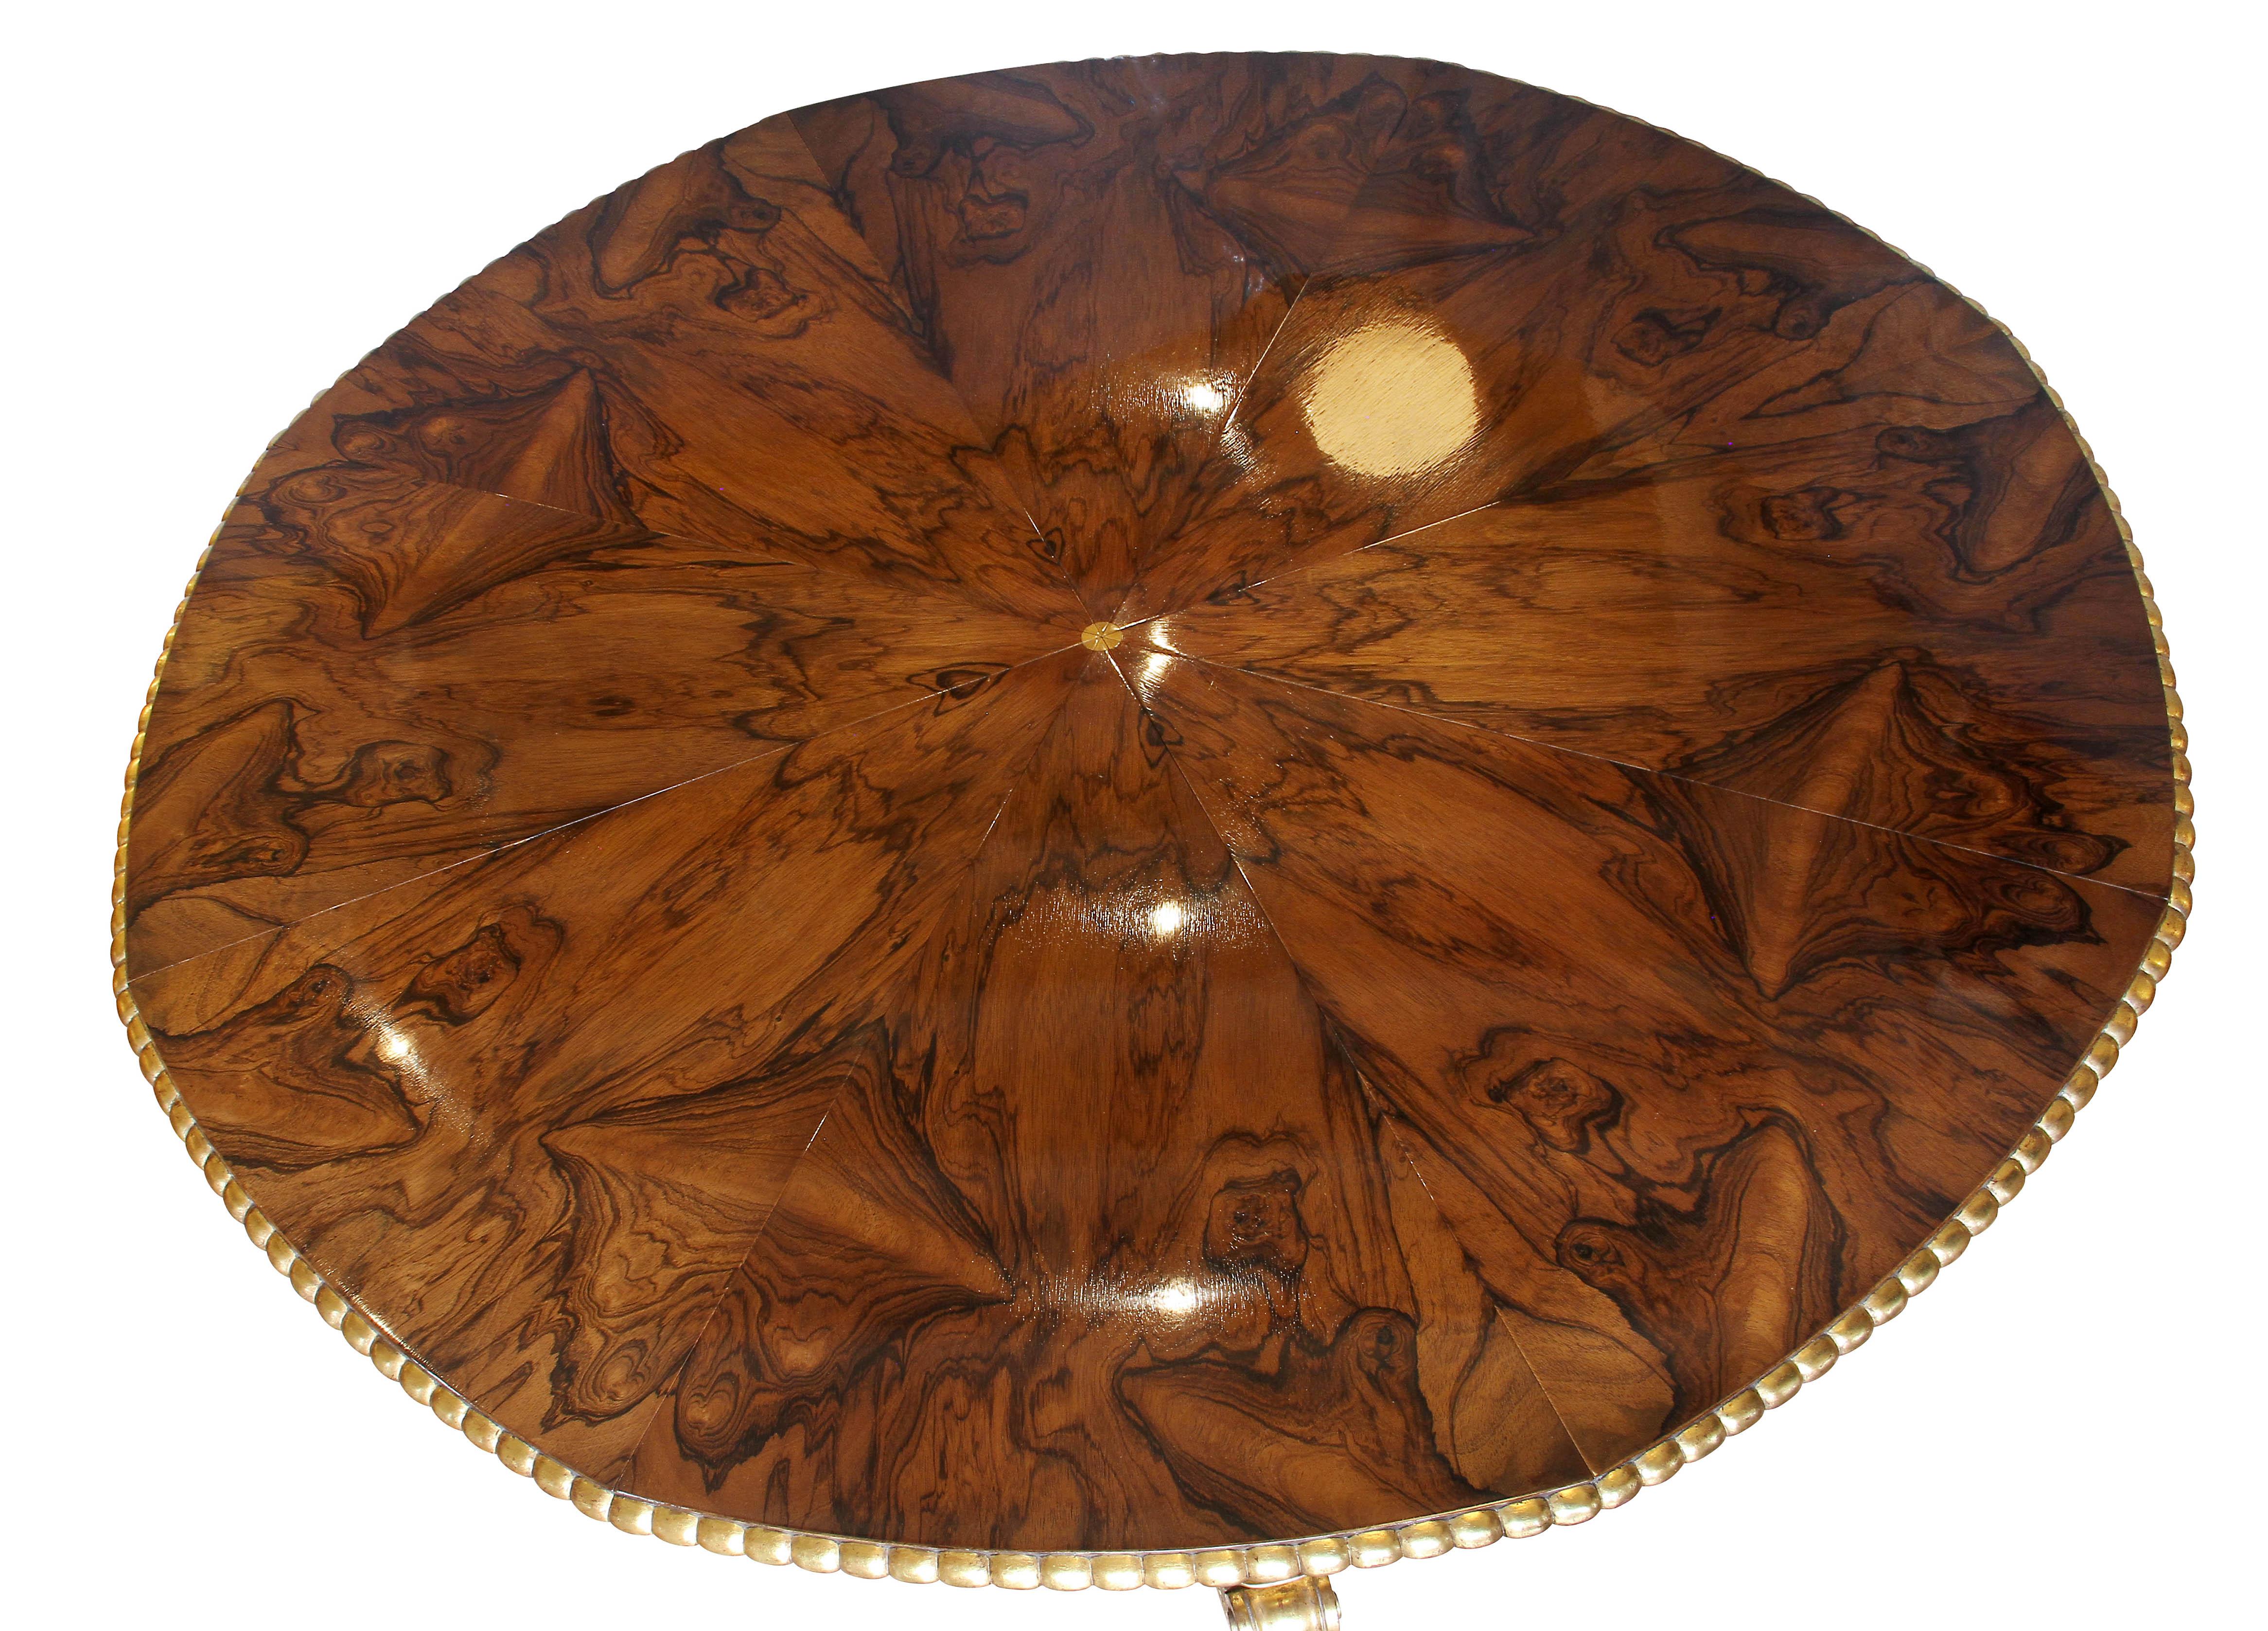 When fully open its circular with a gilded beaded edge, pie shape wedges when closed and stationary and additional rectangular leaves to expand fully. These tables have the ability to expand and remain circular, shaped support over a square concave